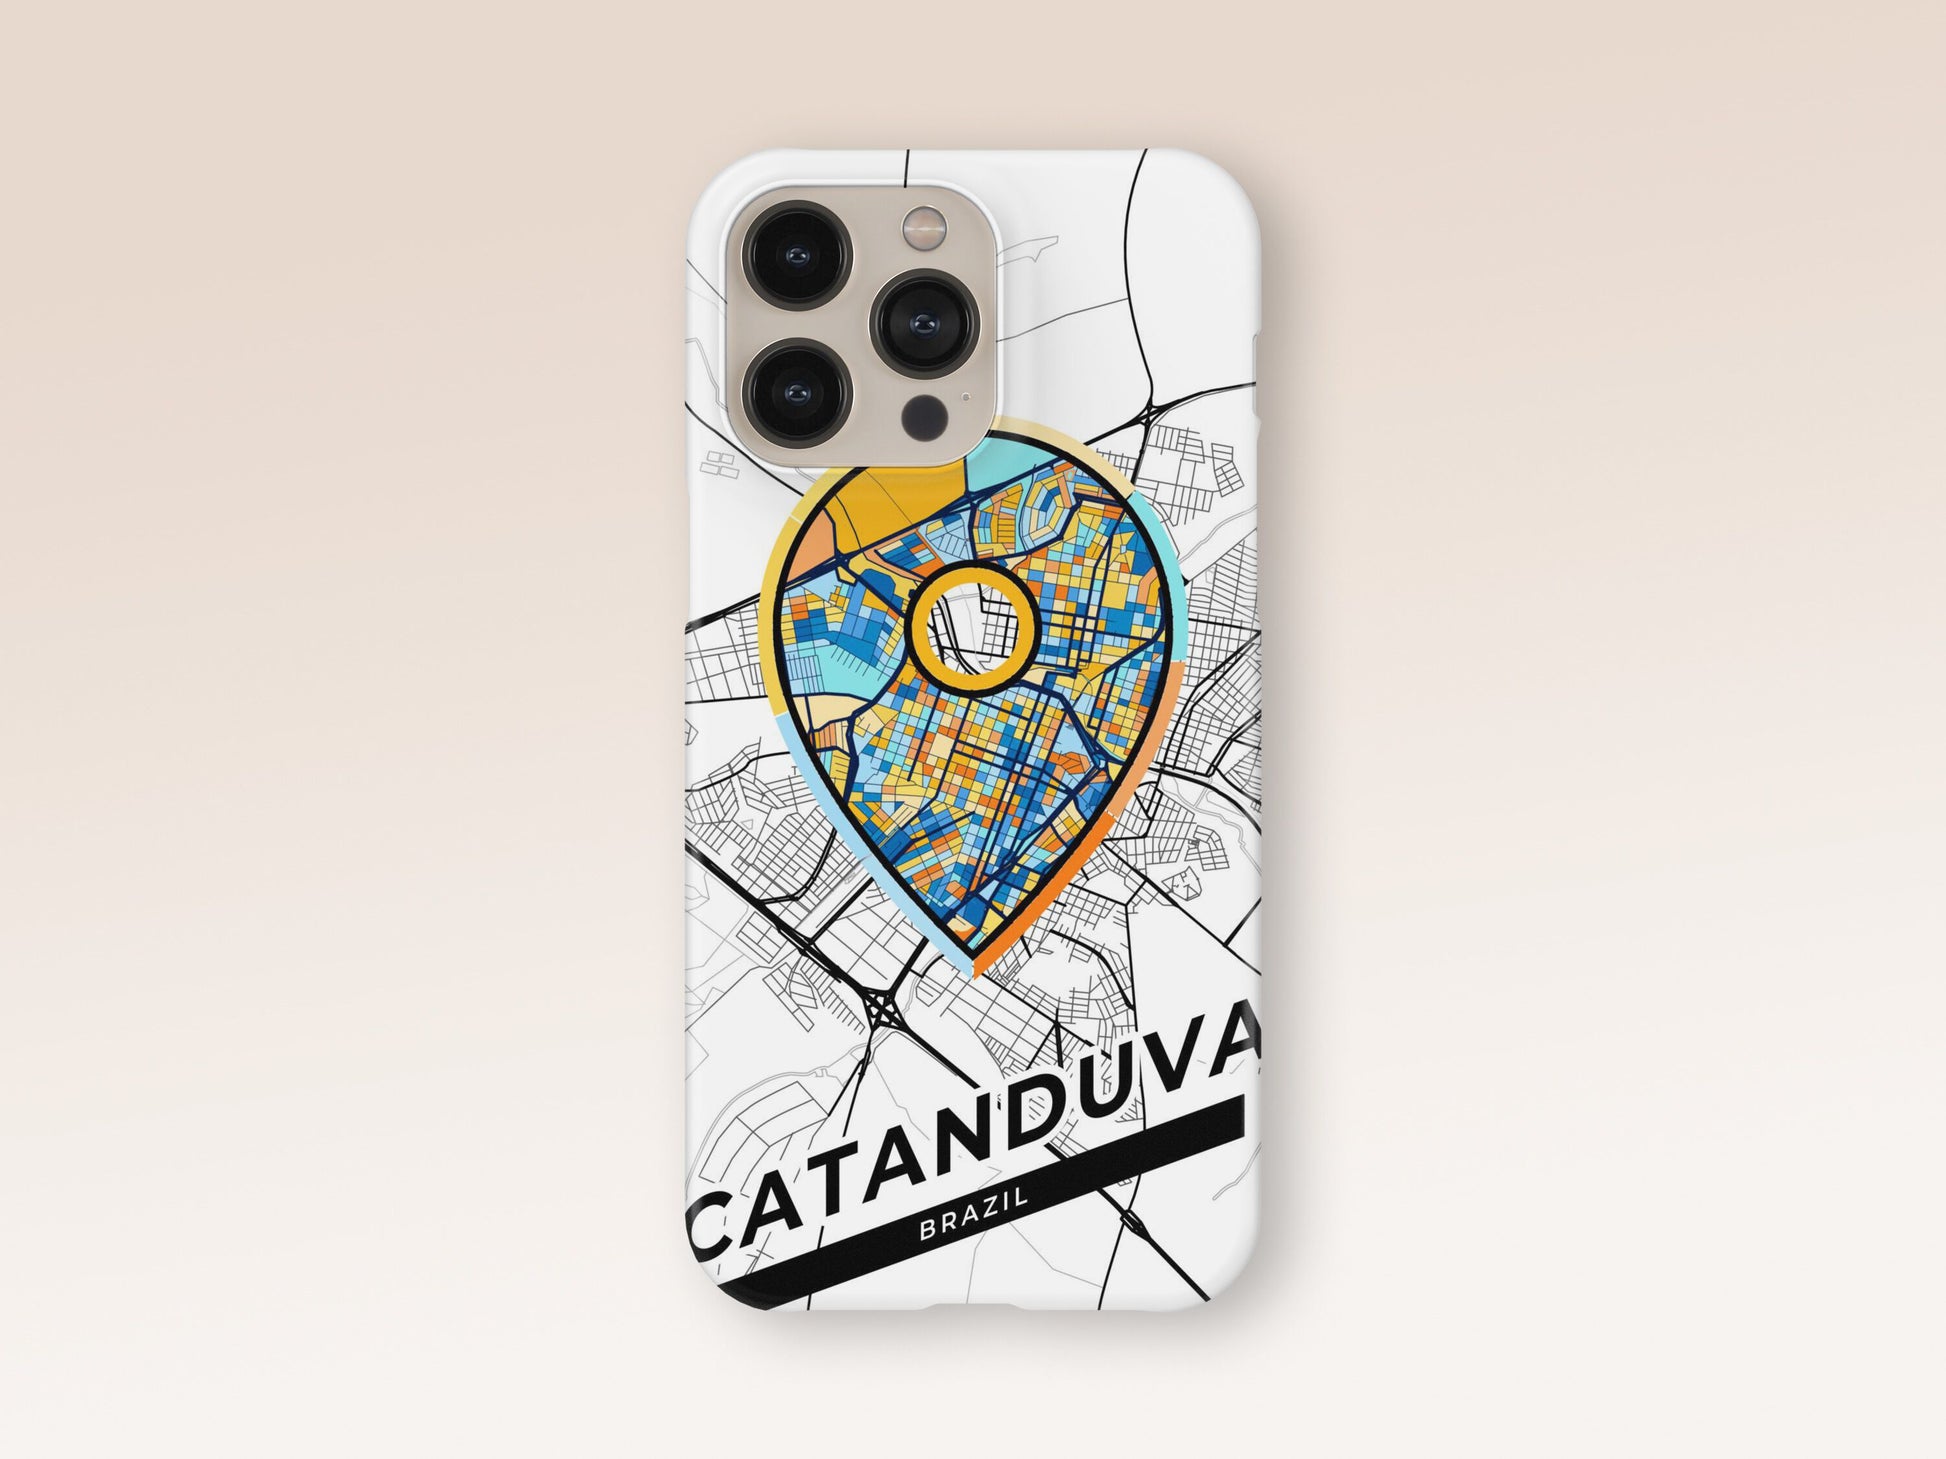 Catanduva Brazil slim phone case with colorful icon. Birthday, wedding or housewarming gift. Couple match cases. 1